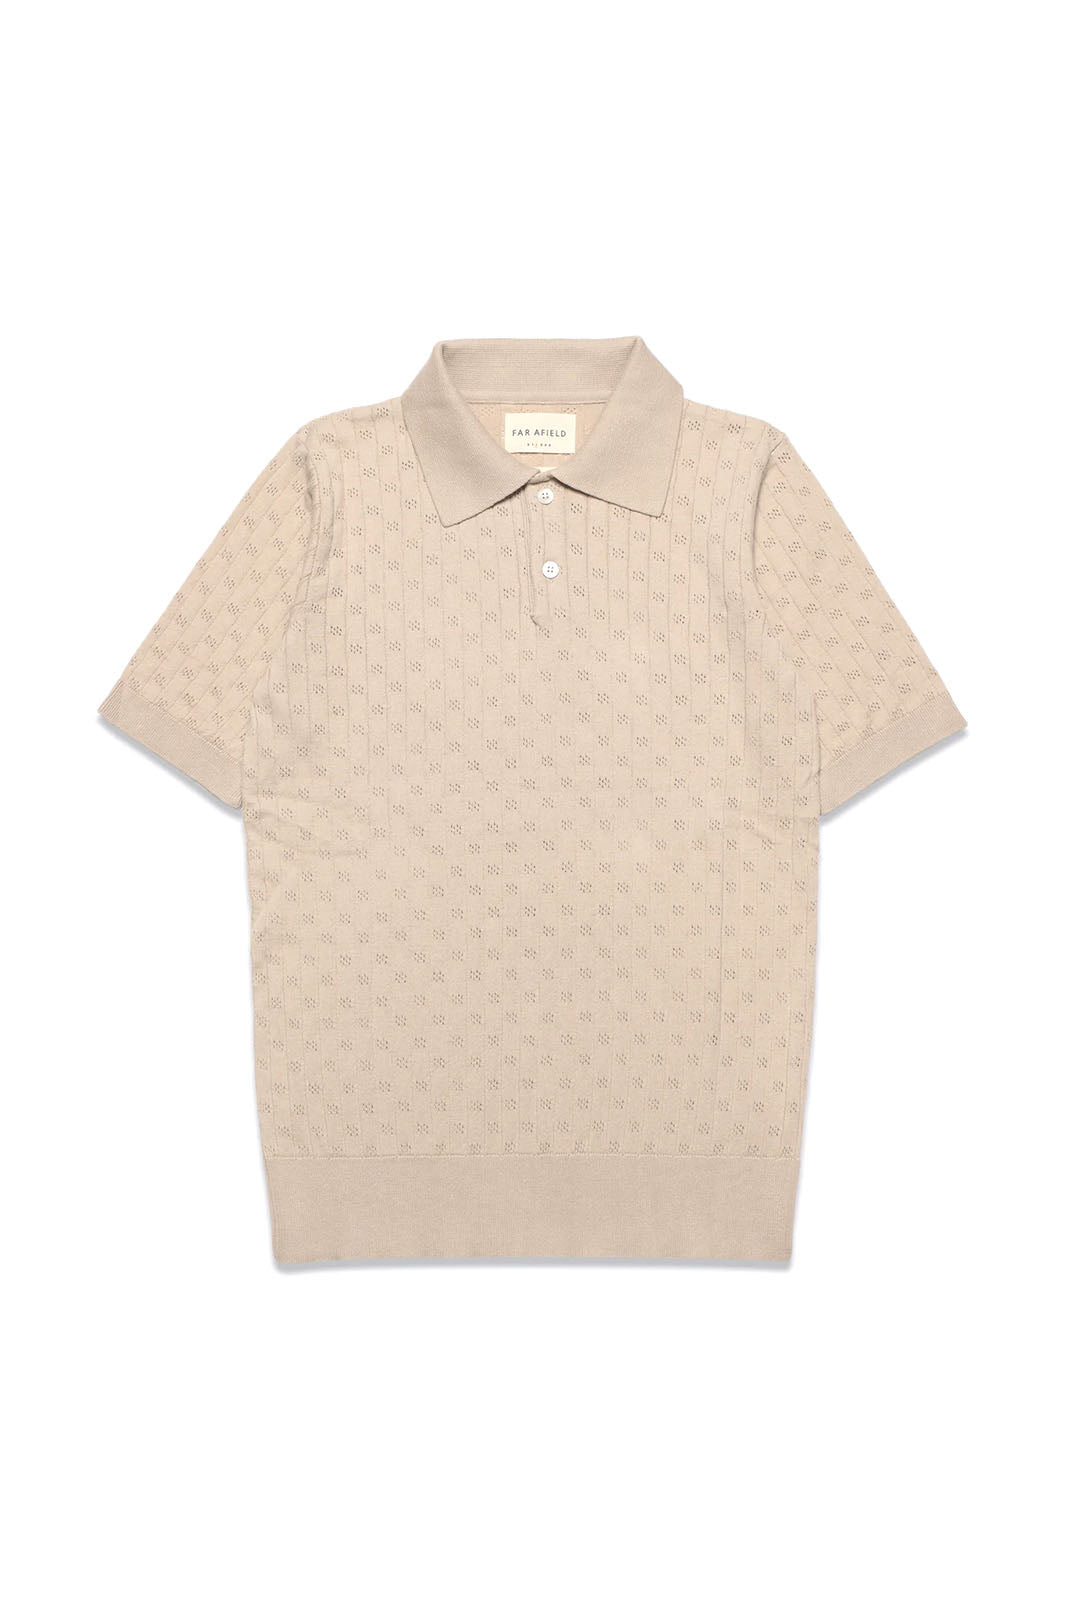 Jacobs Polo - Peyote Sand Perforated Lace